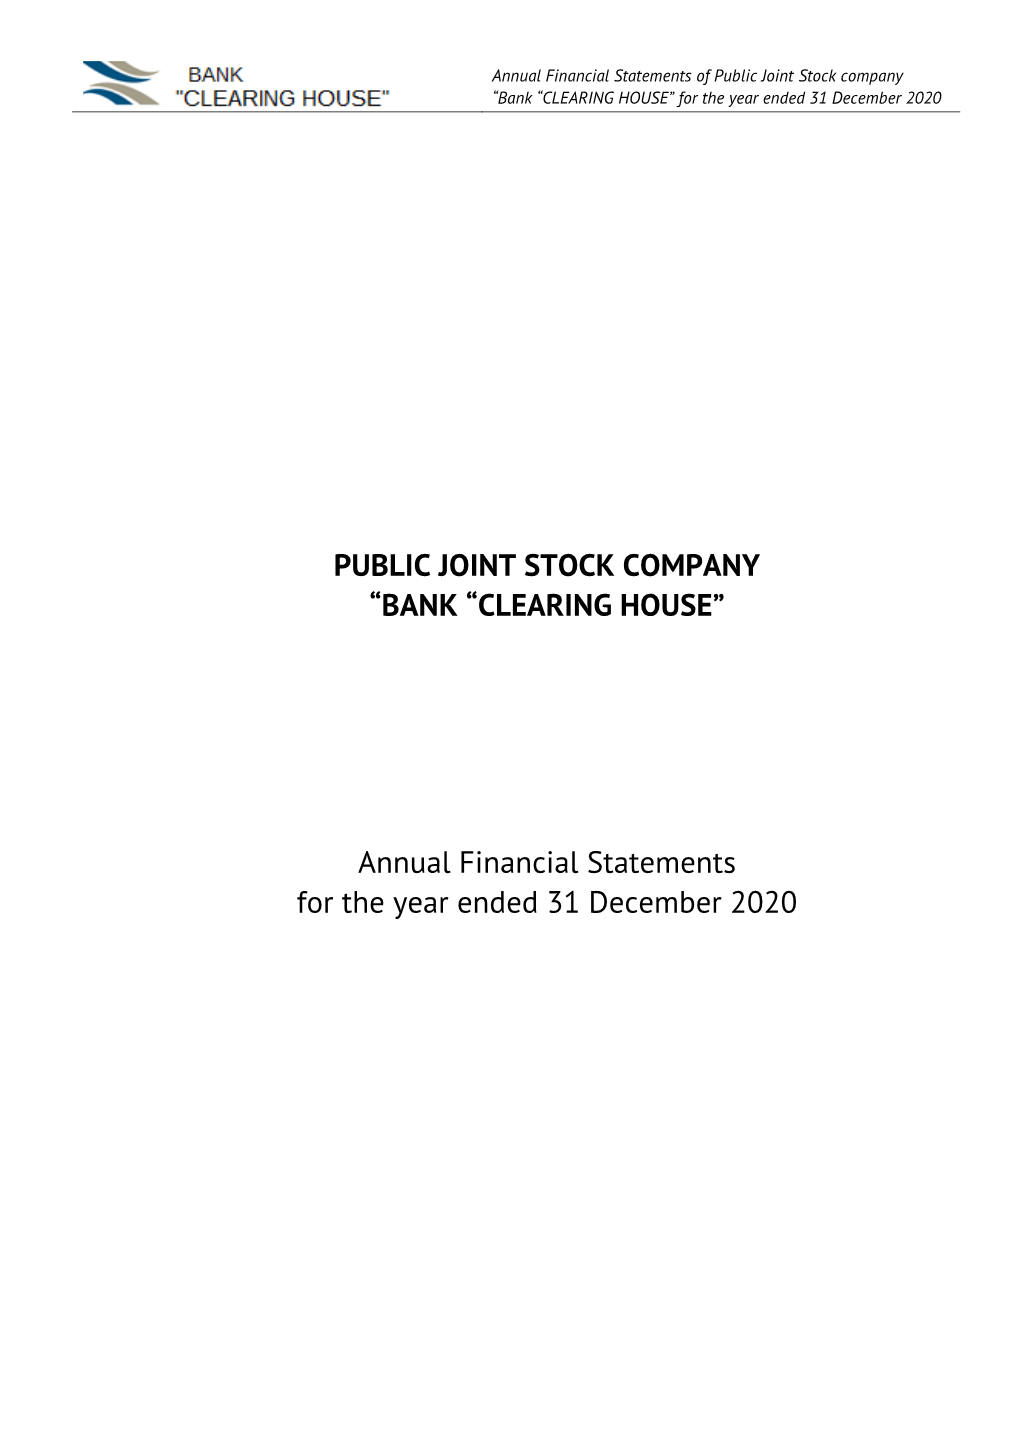 Public Joint Stock Company “Bank “Clearing House”